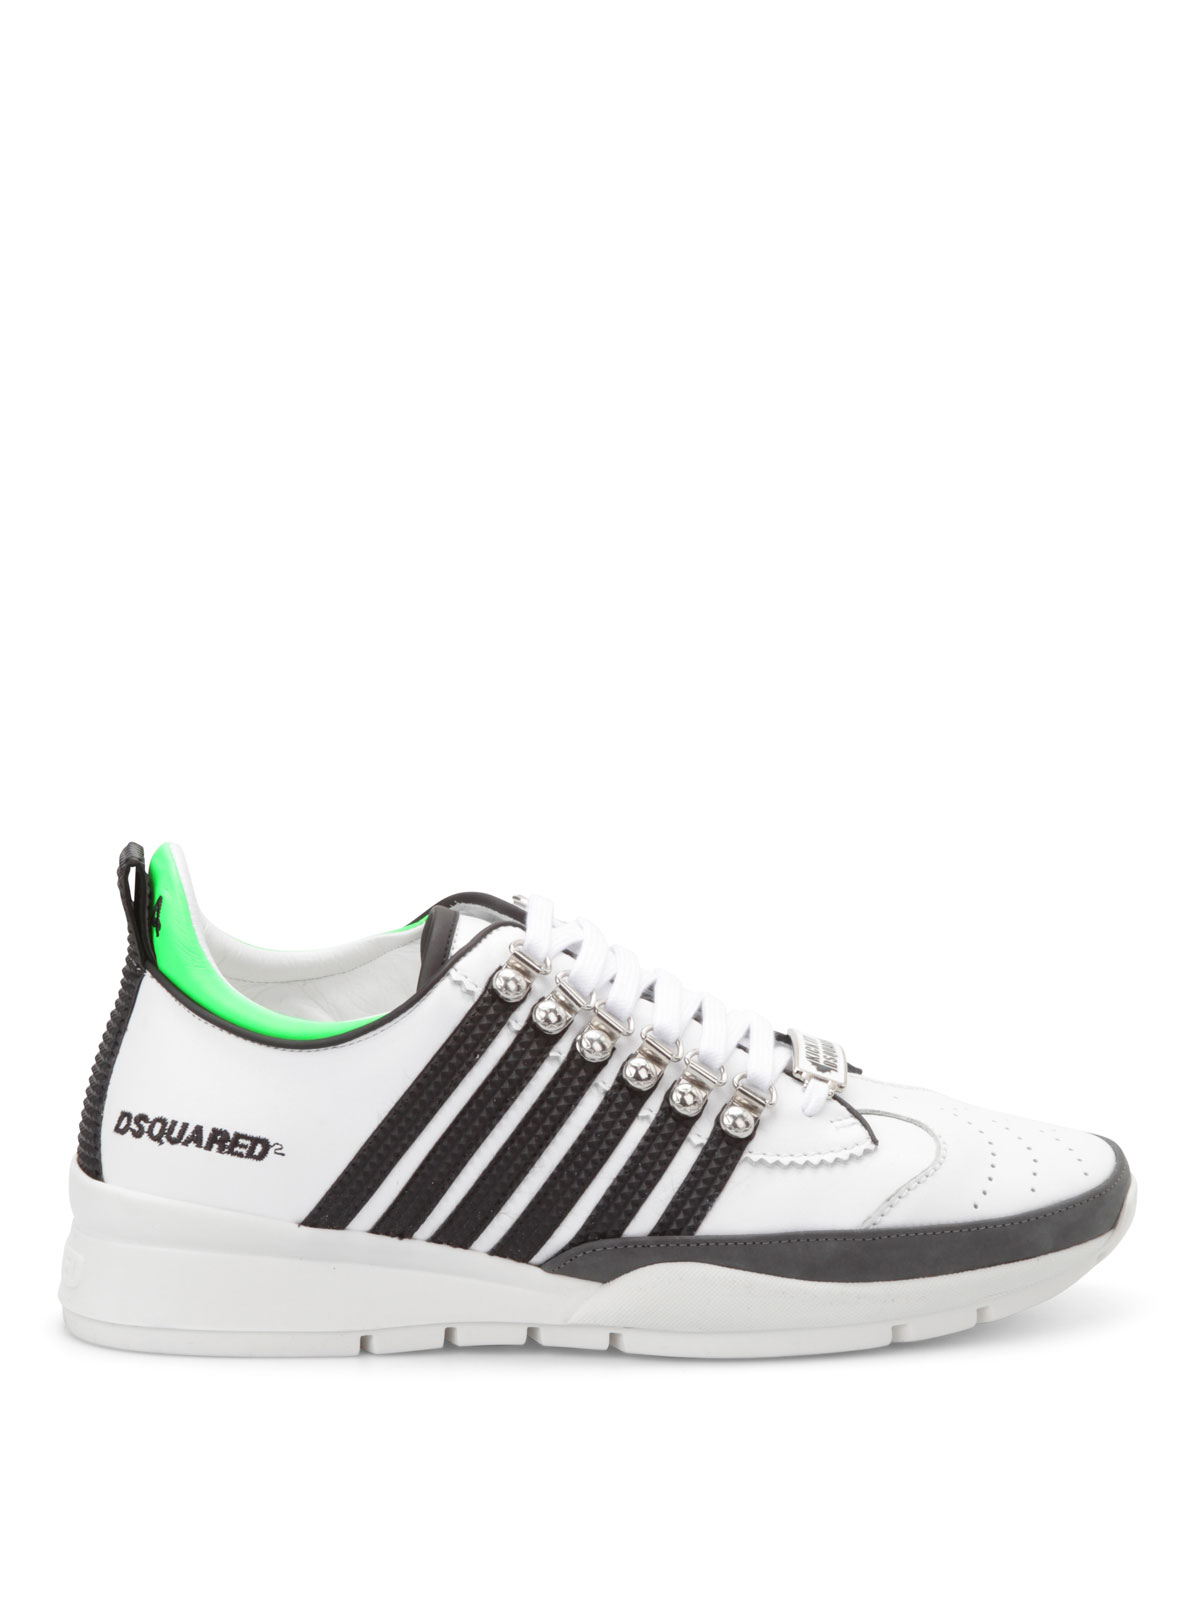 dsquared sneakers 251